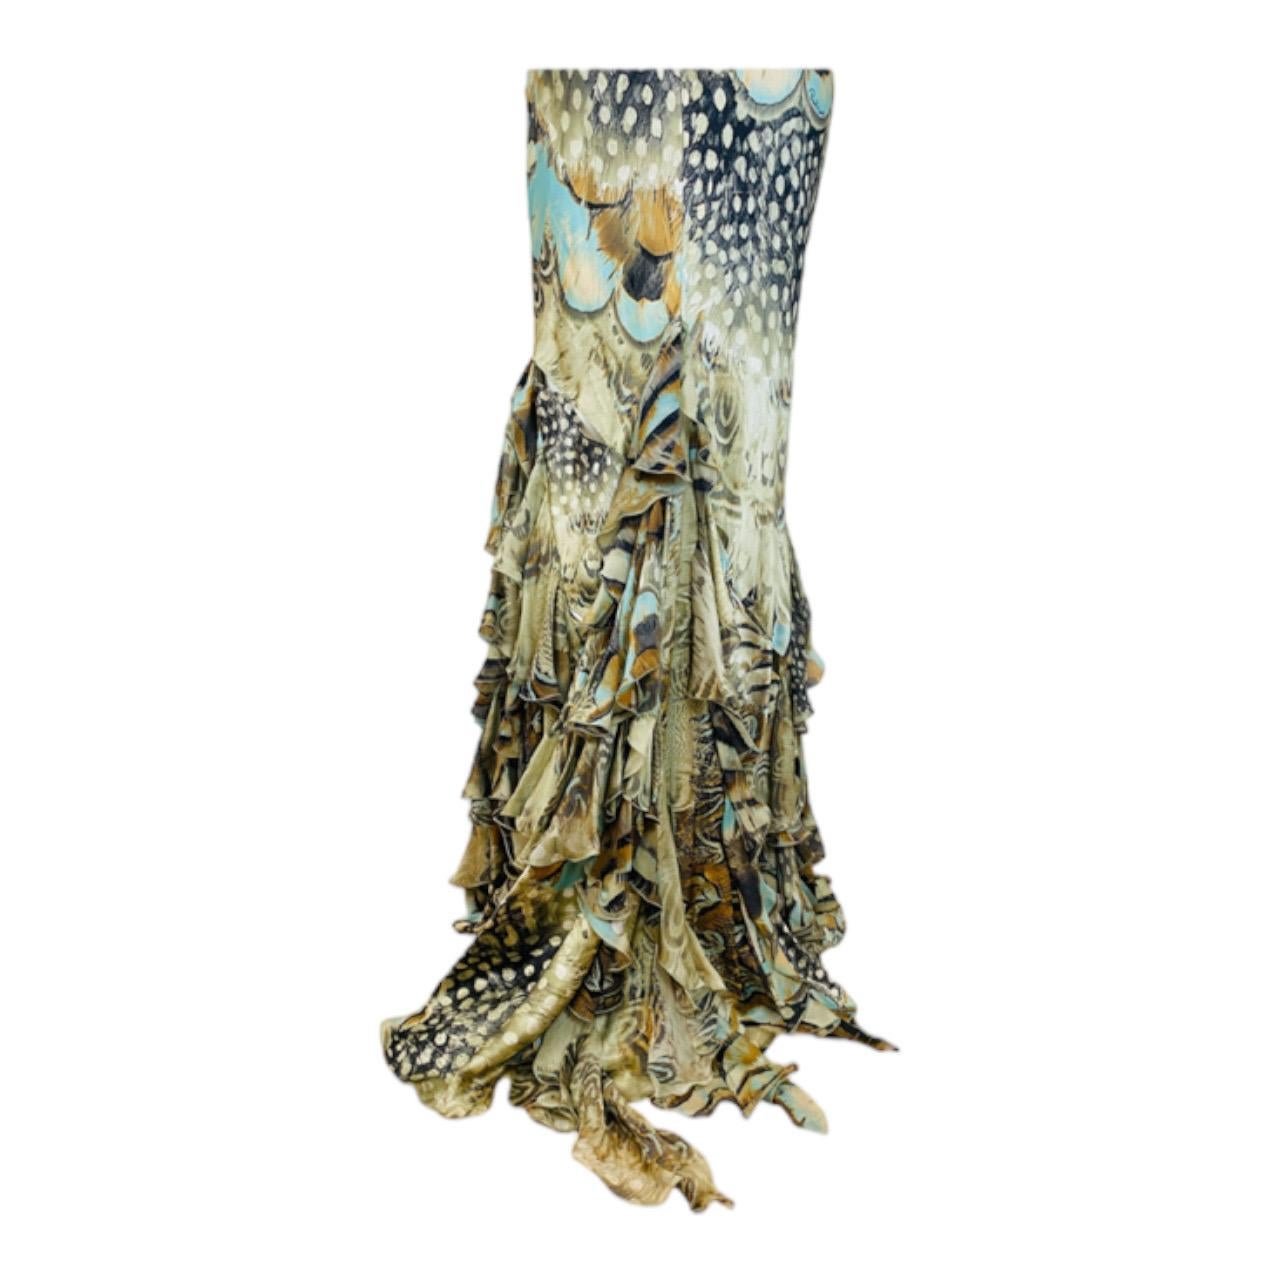 Vintage S/S 2004 Y2K Roberto Cavalli Silk Feather Print Halter Dress Gown Ruffle For Sale 4